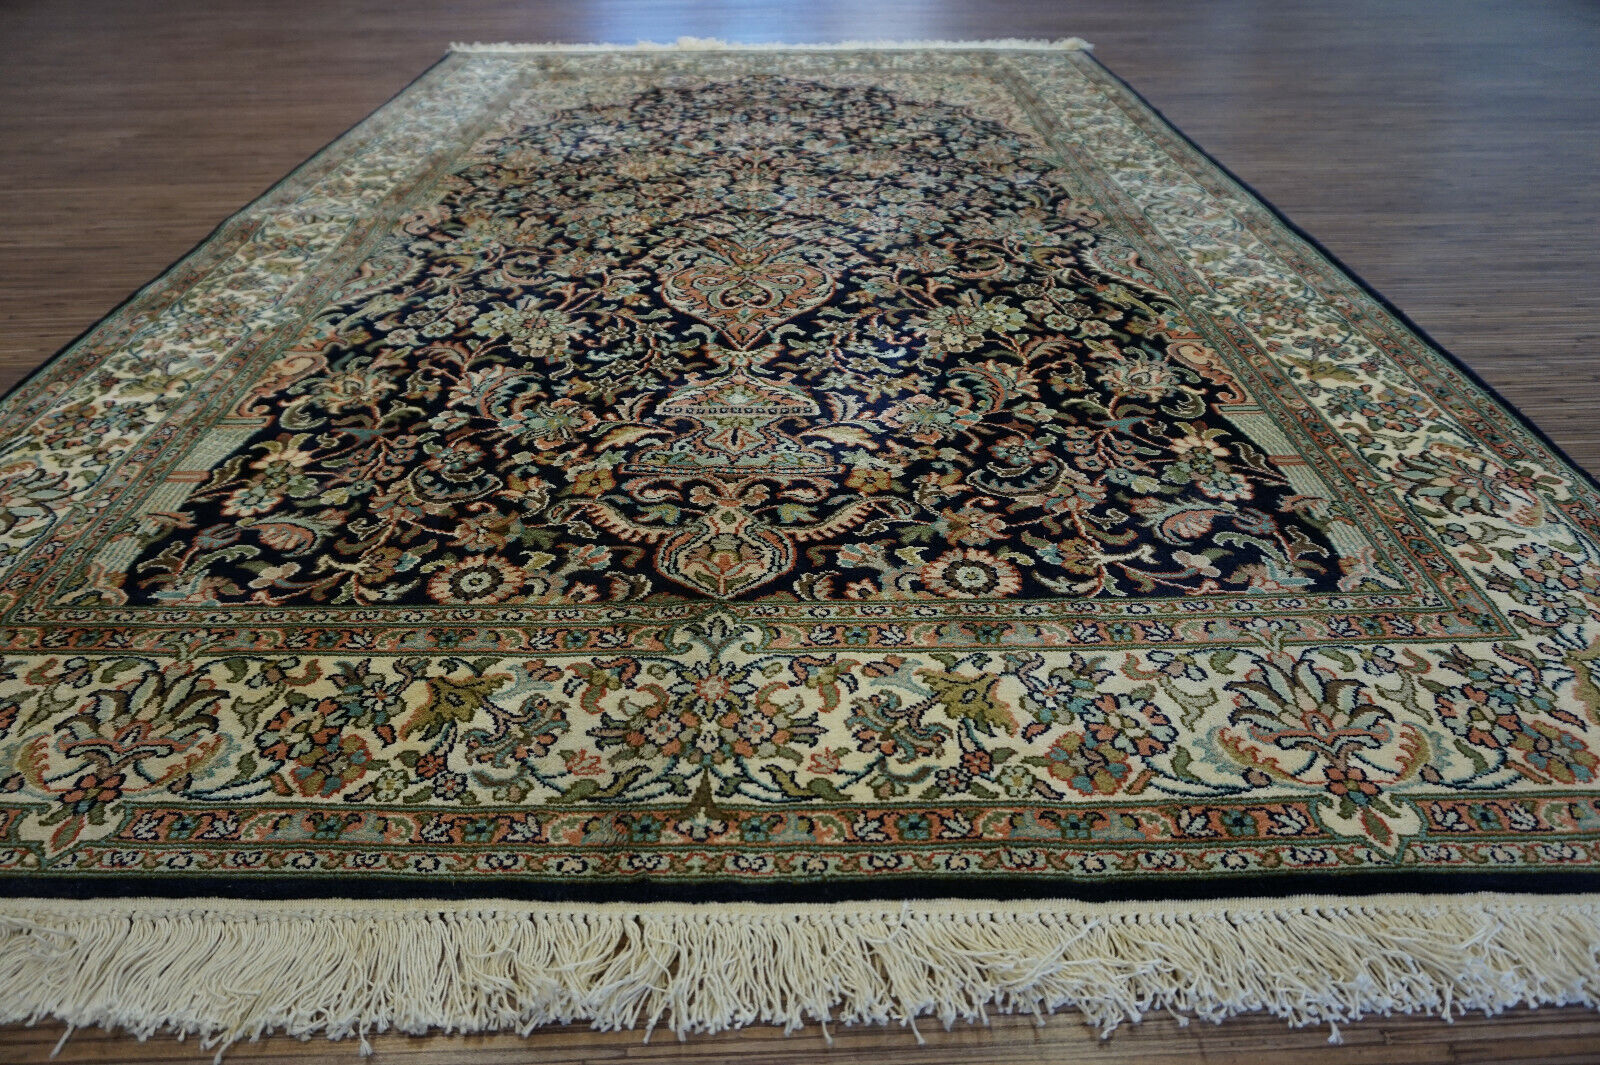 Artistic display of the Handmade Vintage Persian Kashmir Rug as a statement piece